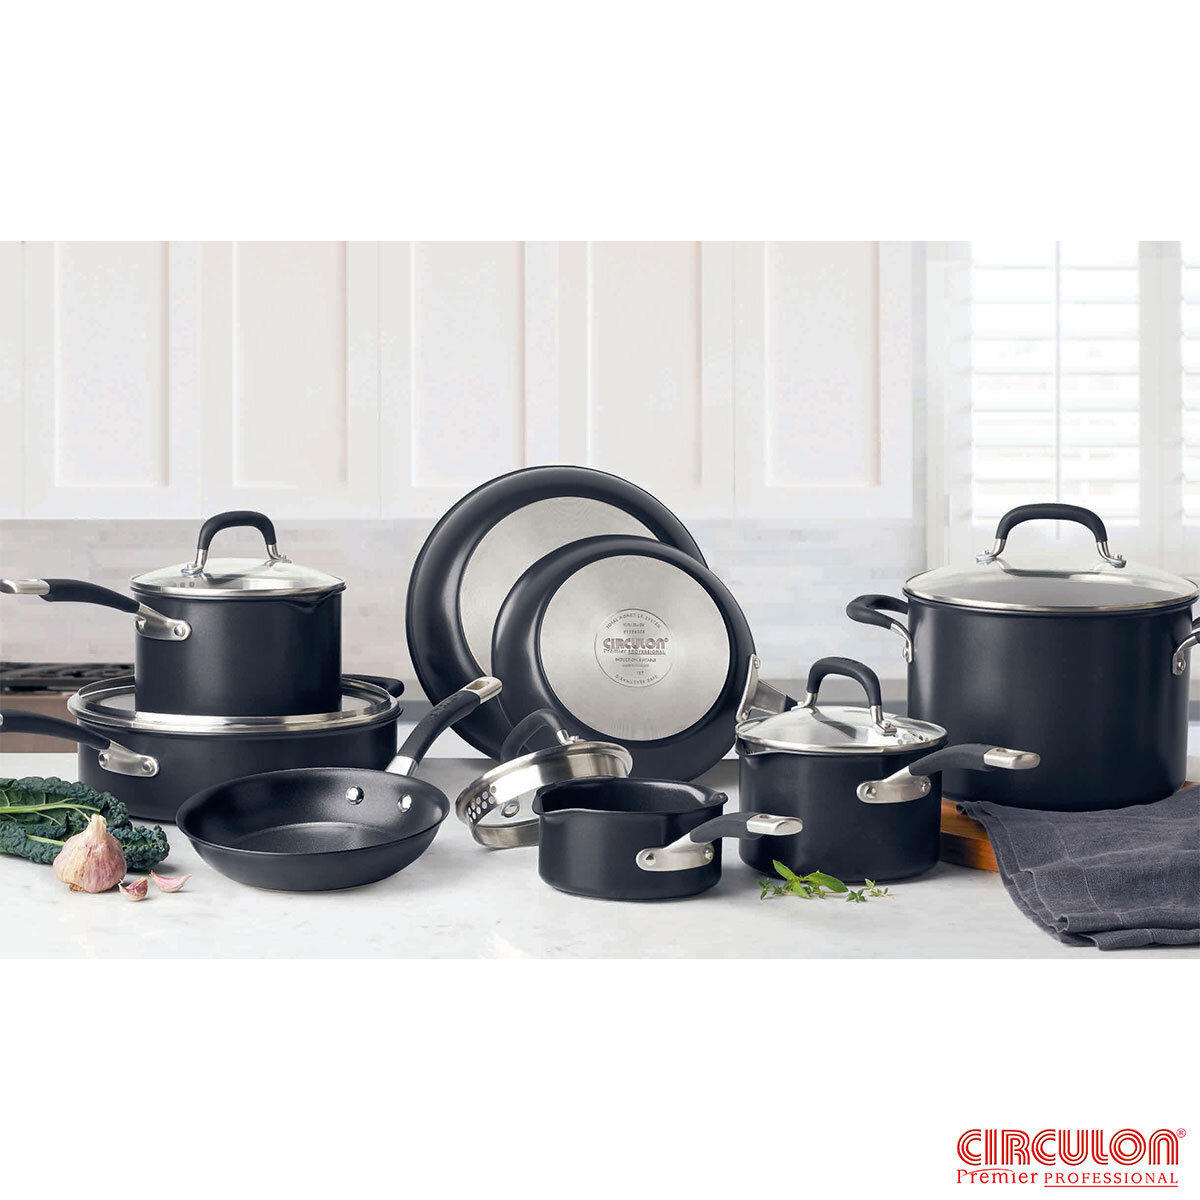 Troosteloos Abstractie beest Circulon Premier Hard Anodised Induction 13 Piece Cookwar...